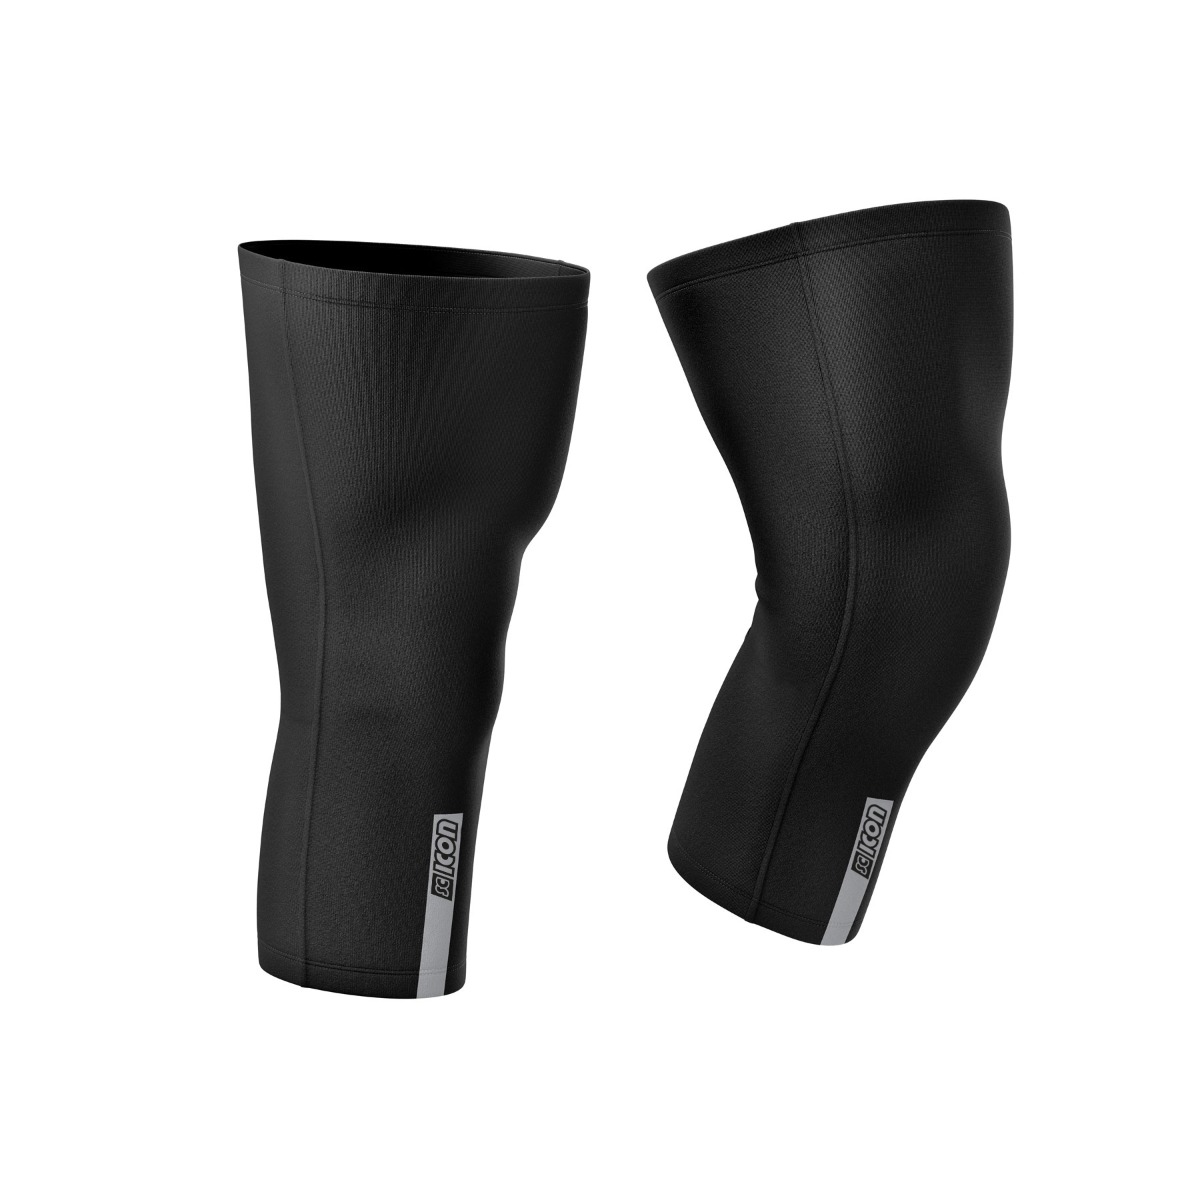 Download SHOP | Scicon Sports Cycling Knee Warmers for Winter ...